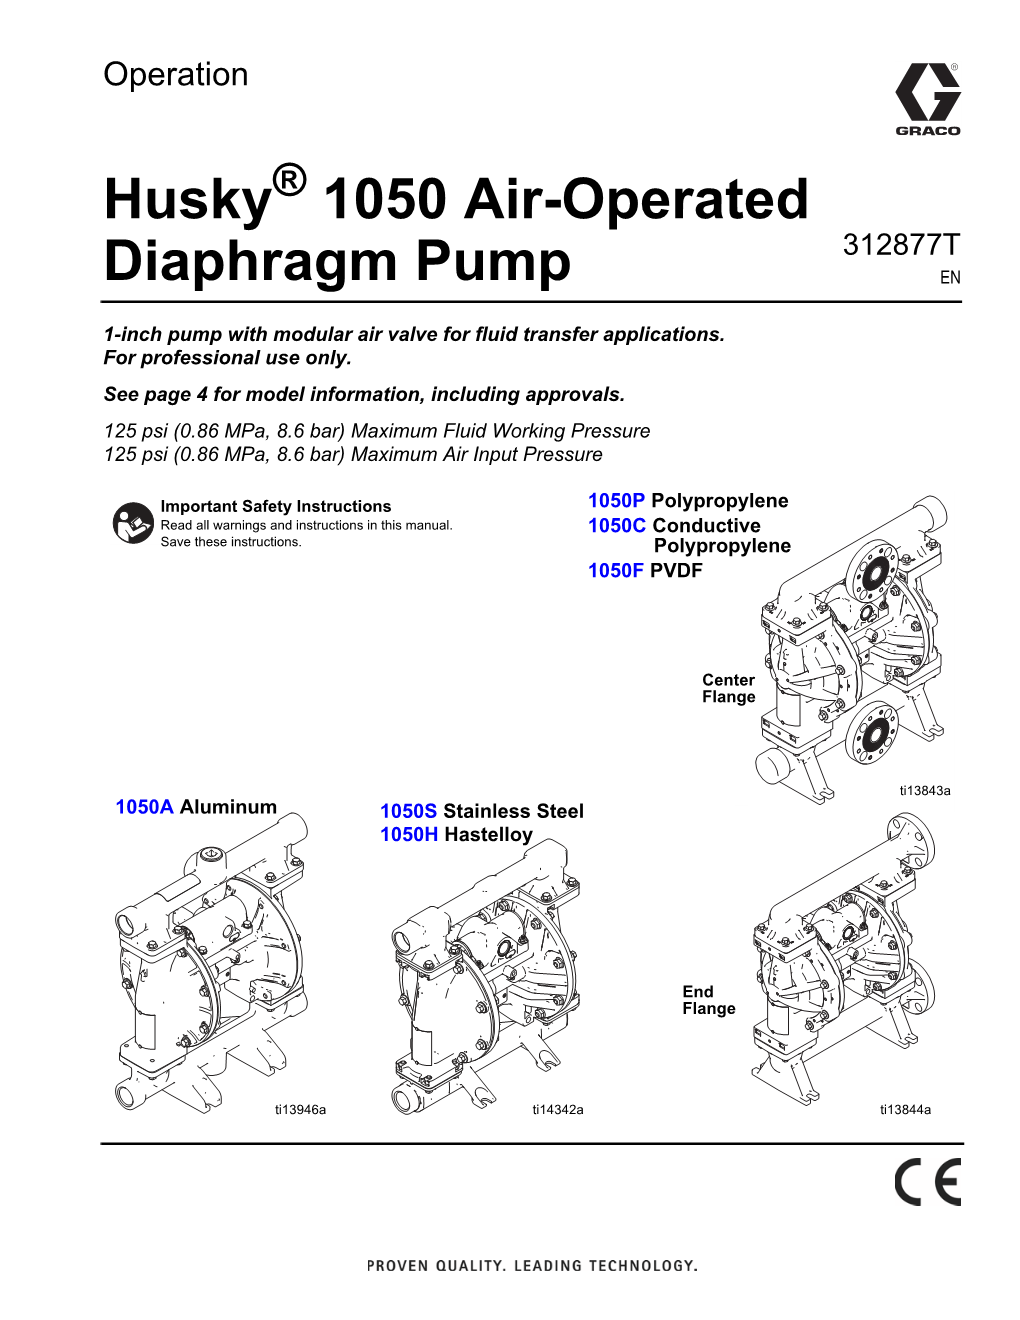 312877T, Husky 1050 Air-Operated Diaphragm Pump, Operation, English